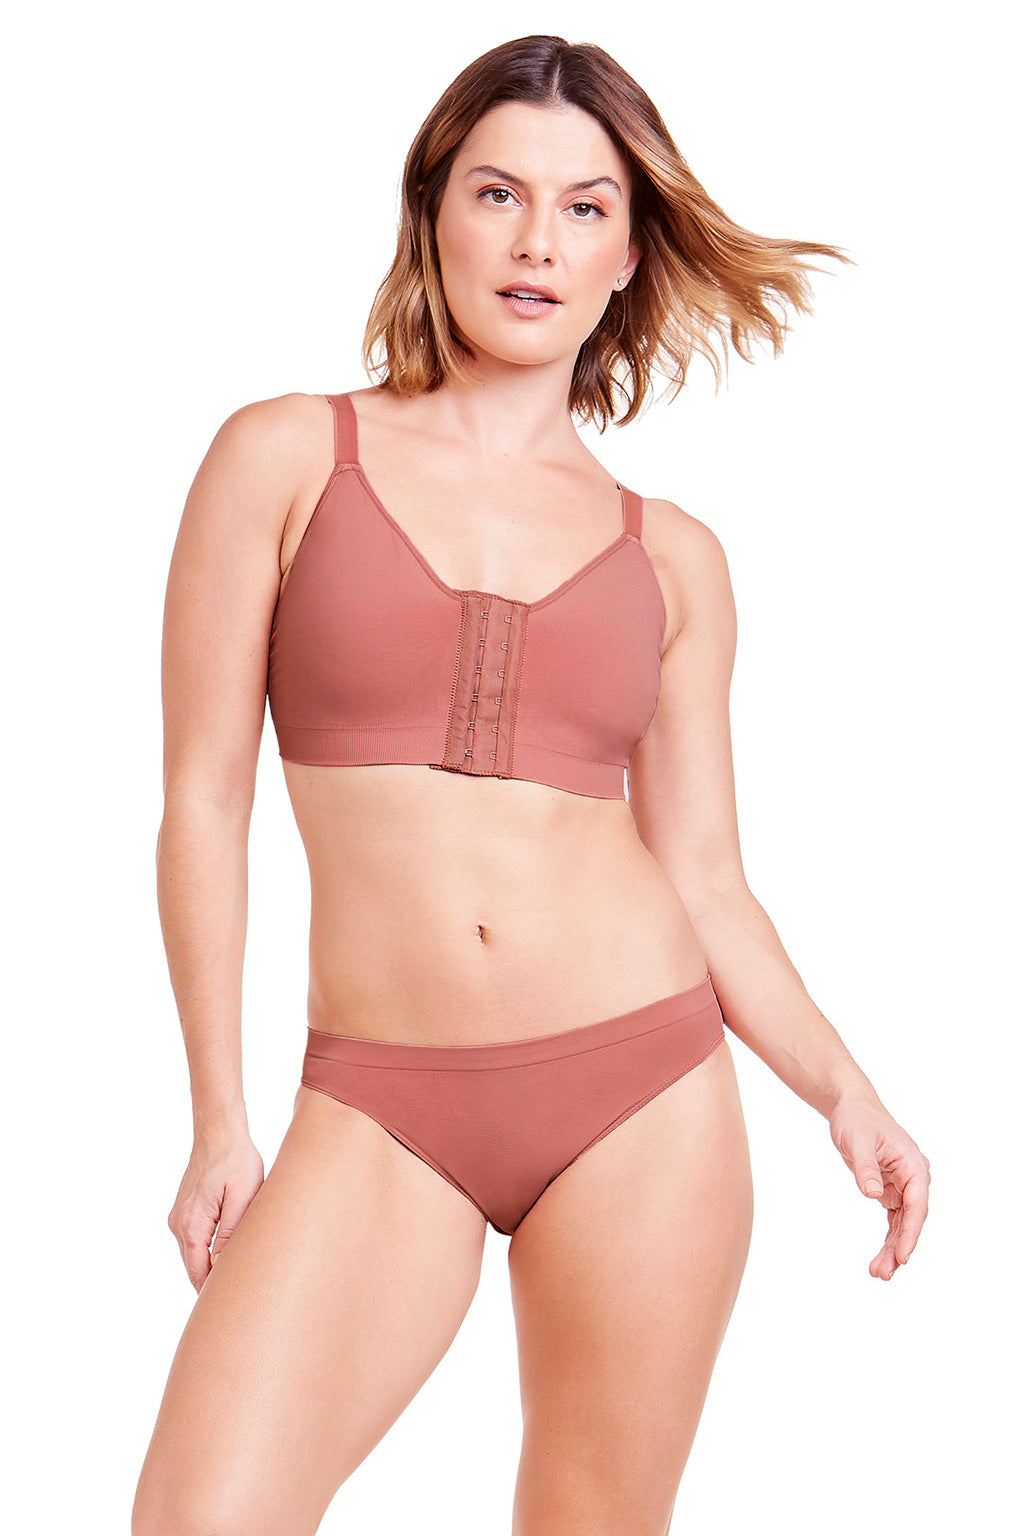 Plie CONTROL Aesthetic Bra with Front Opening